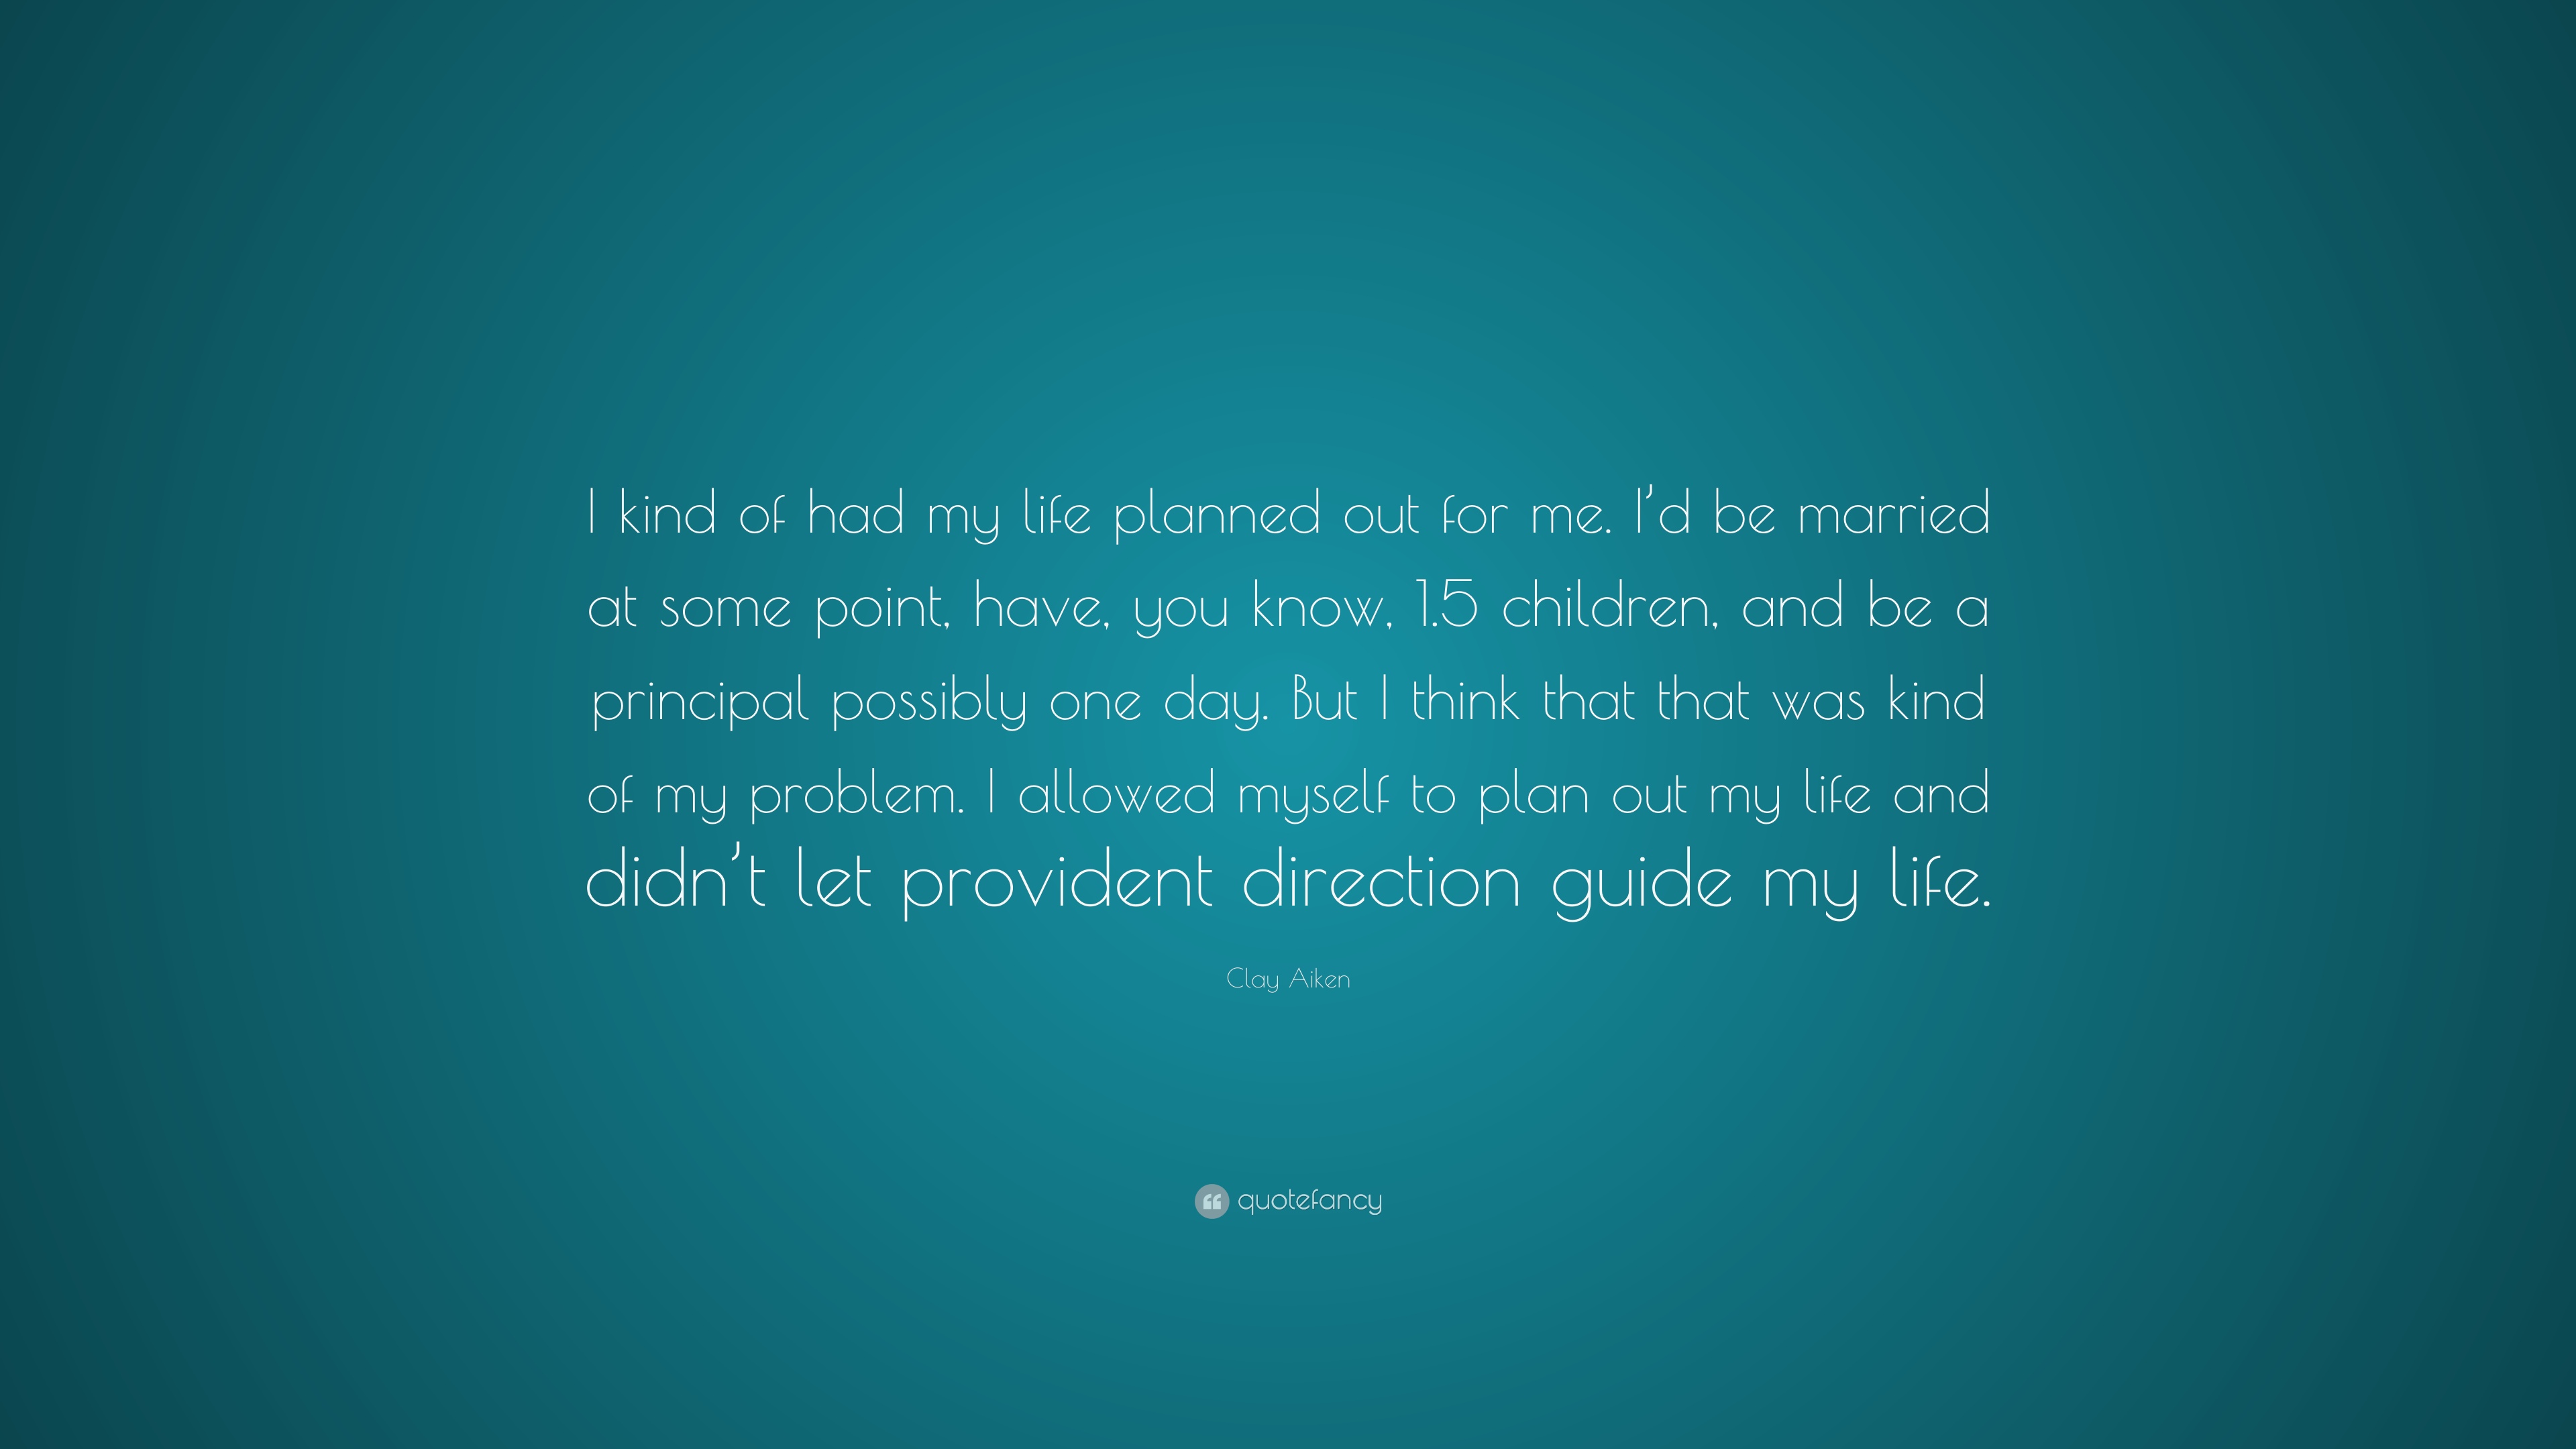 Clay Aiken Quote: “I kind of had my life planned out for me. I'd be ...